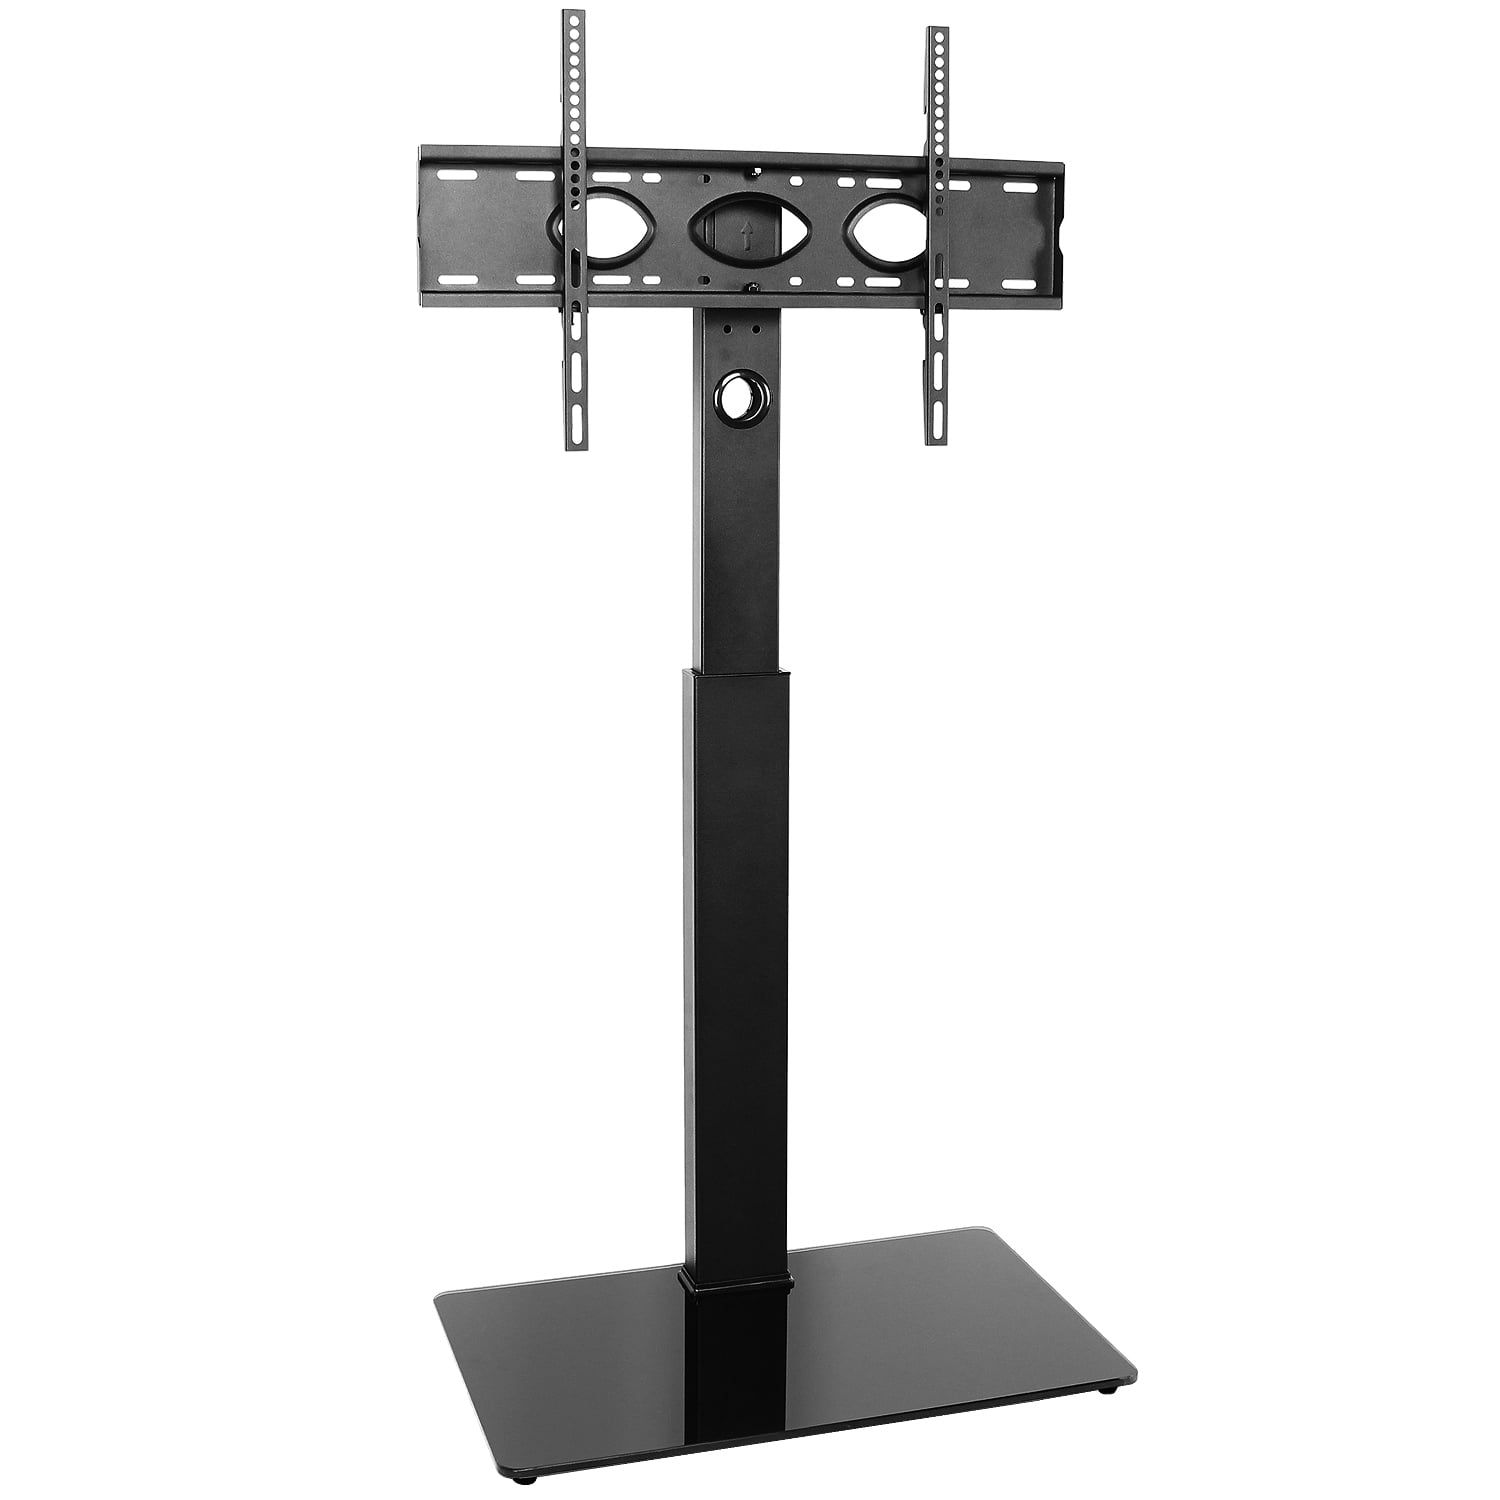 5rcom Universal Swivel Floor Tv Stand Base With Space Saving Design For Regarding Universal Floor Tv Stands (View 9 of 20)